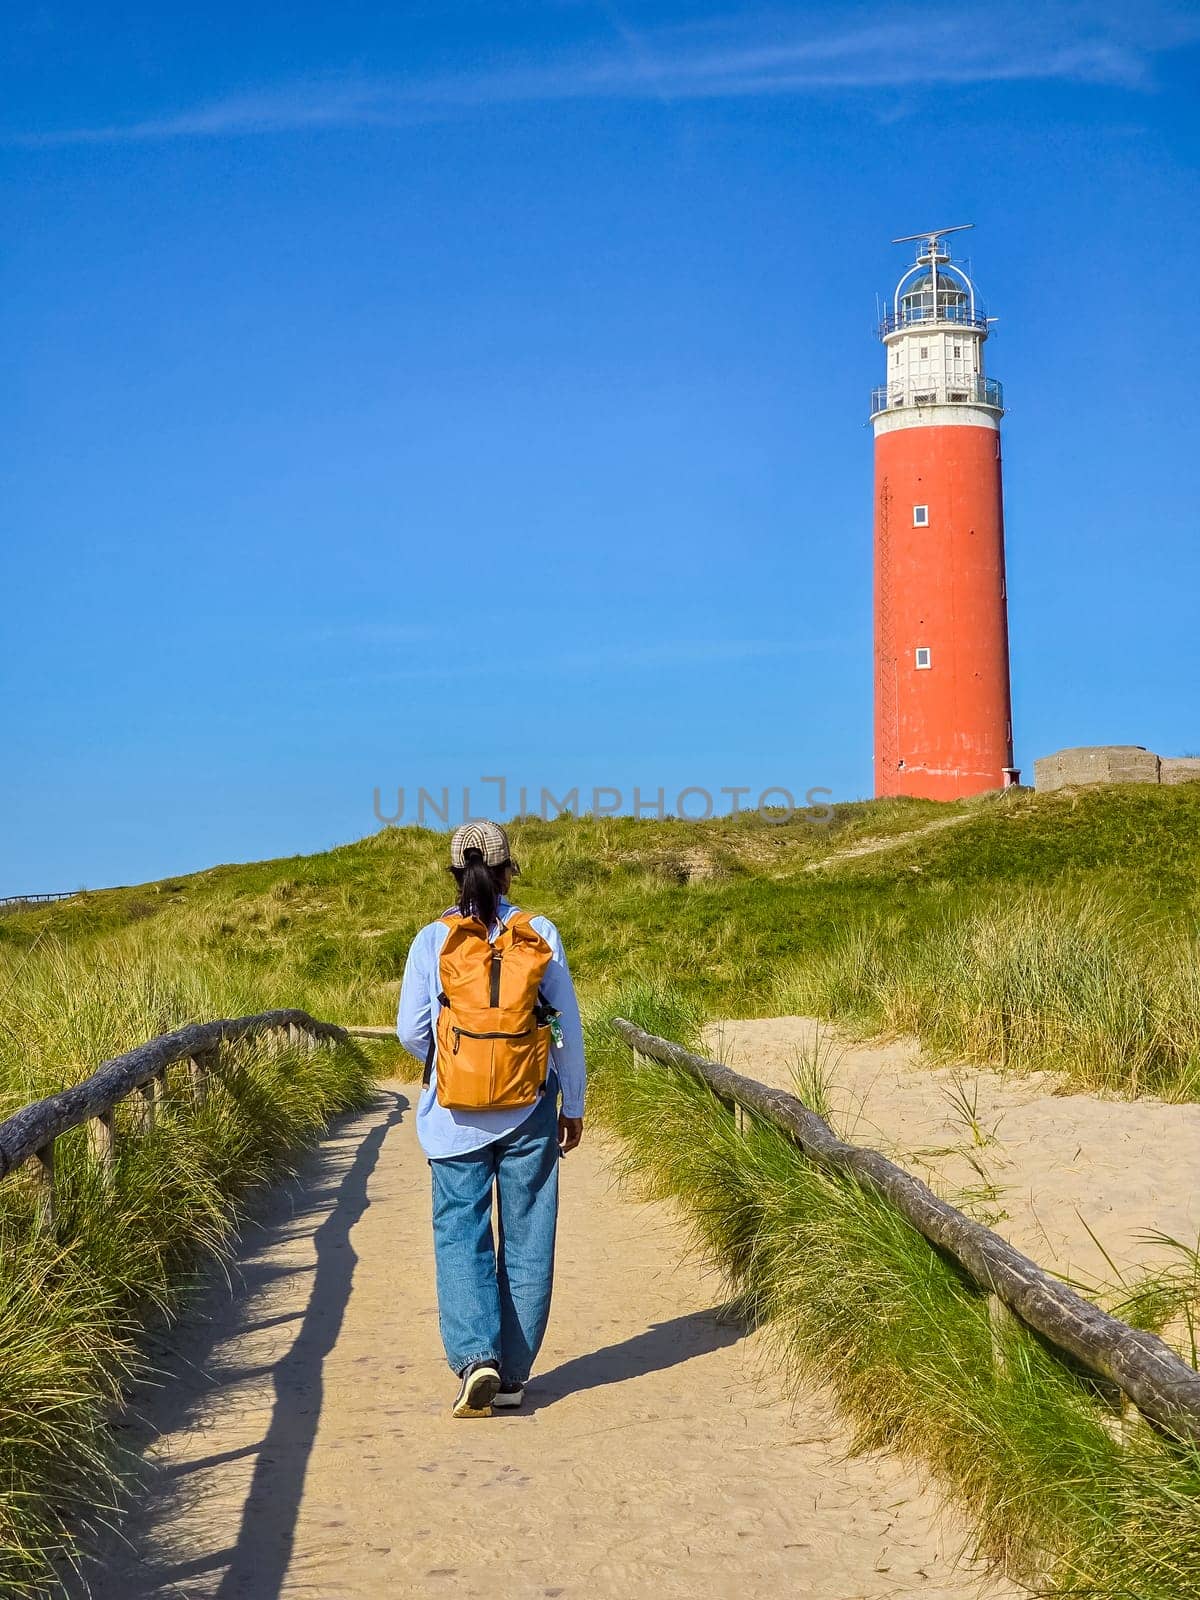 A man walking down a path with a majestic lighthouse standing tall in the background, guiding his way through the Texel, Netherlands.